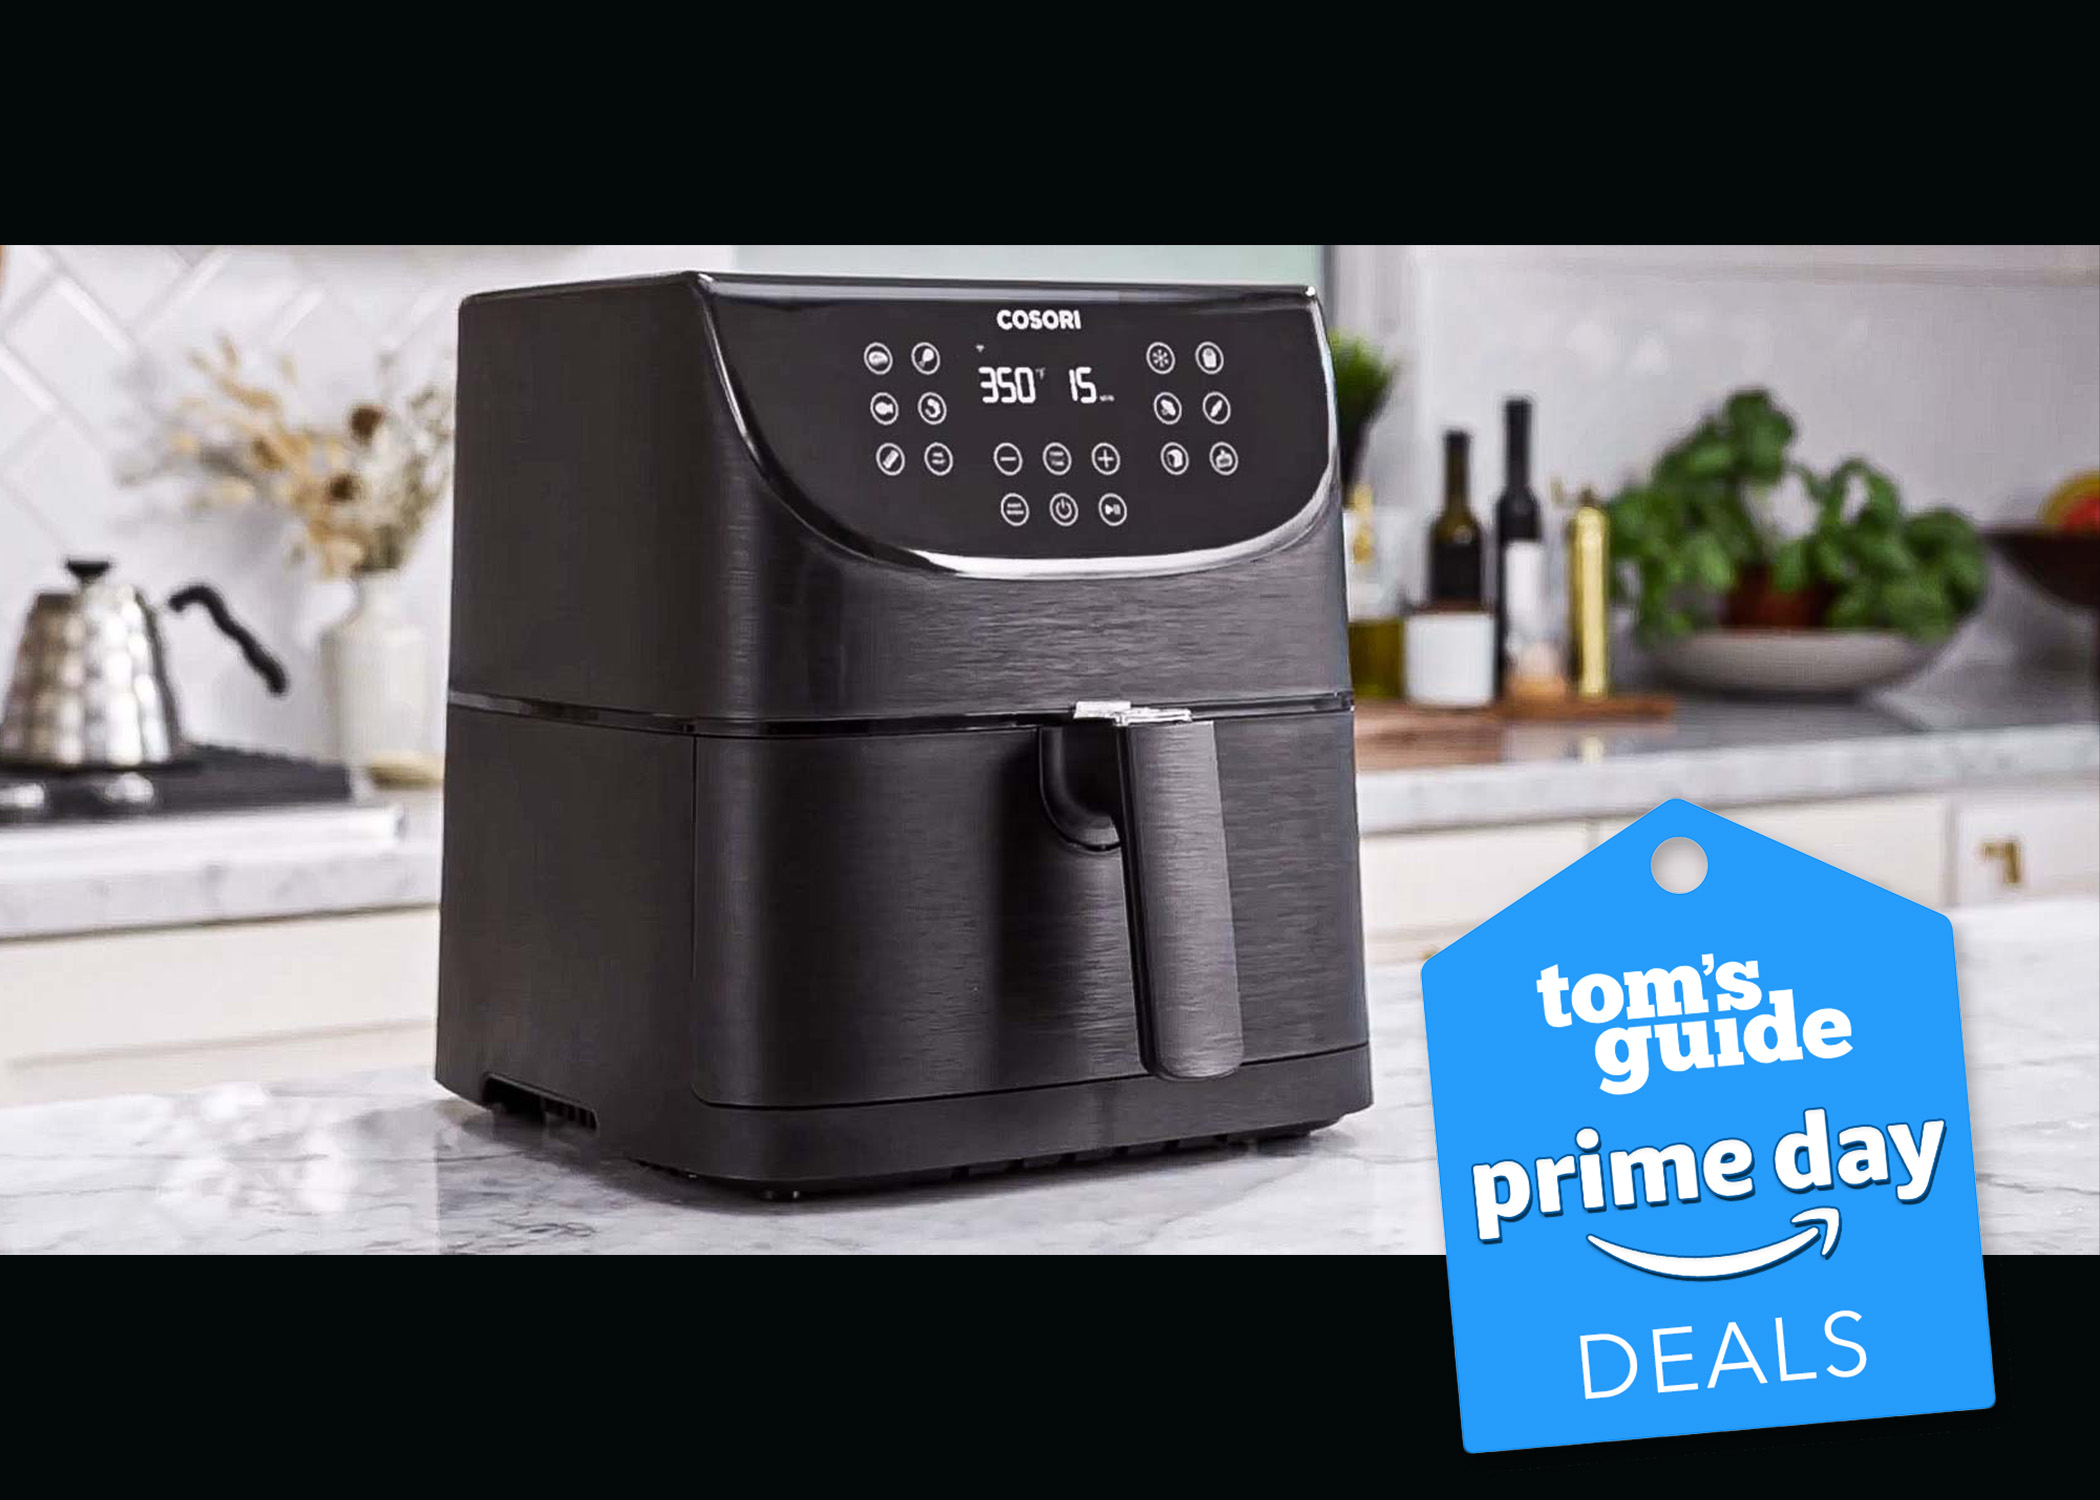 Image of Cosori Smart Air Fryer XL with Prime Day tag